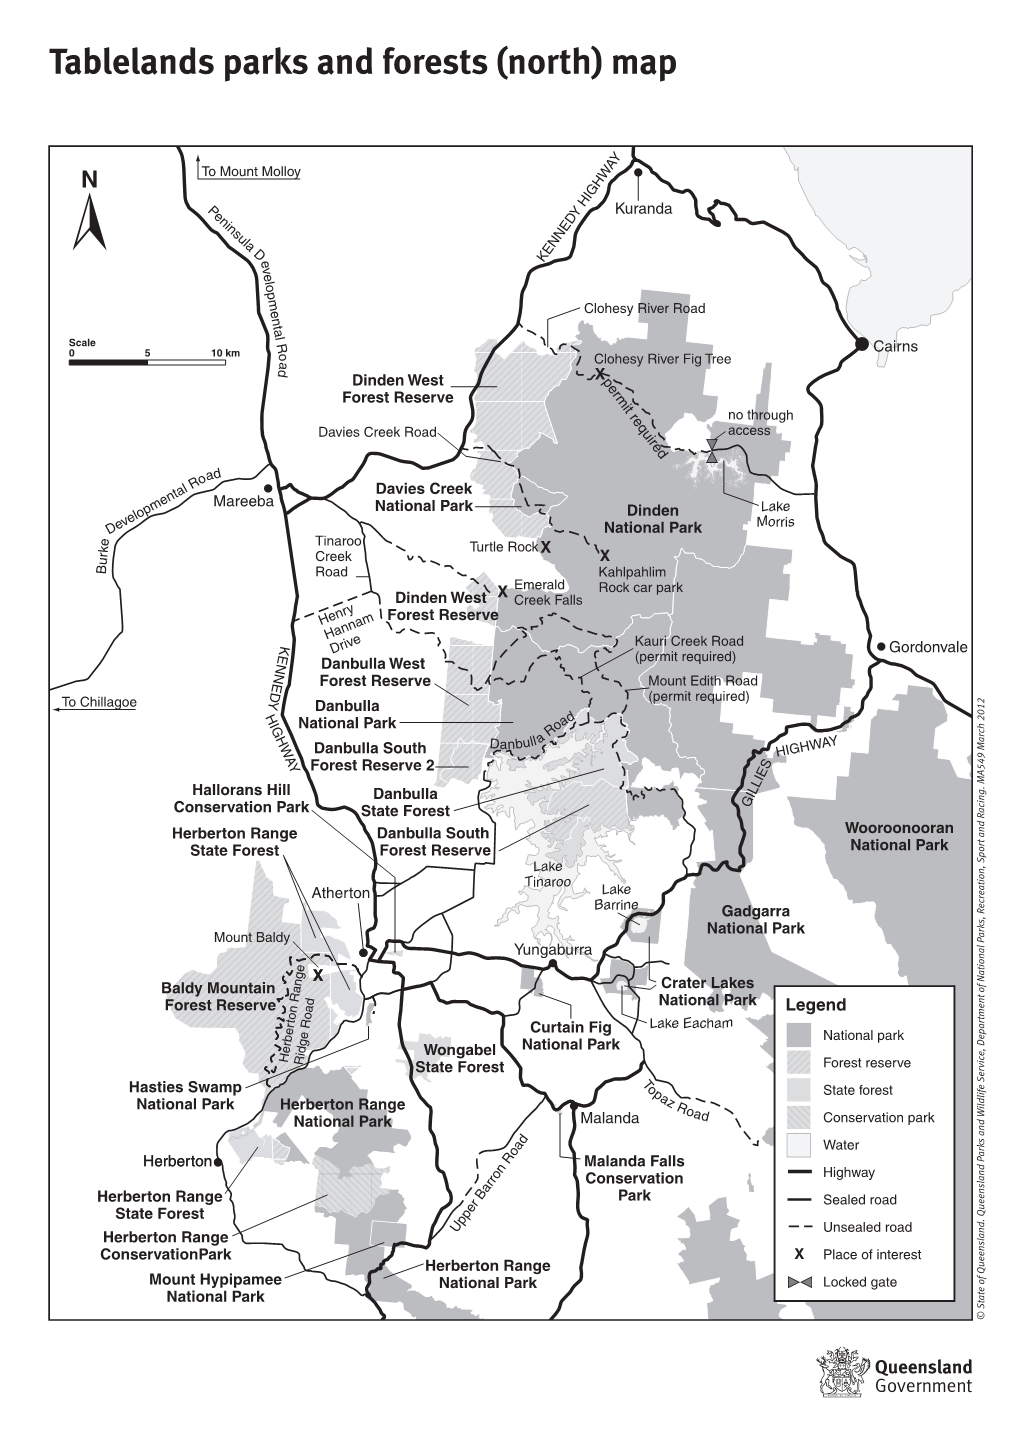 Tablelands Parks and Forests (North) Map